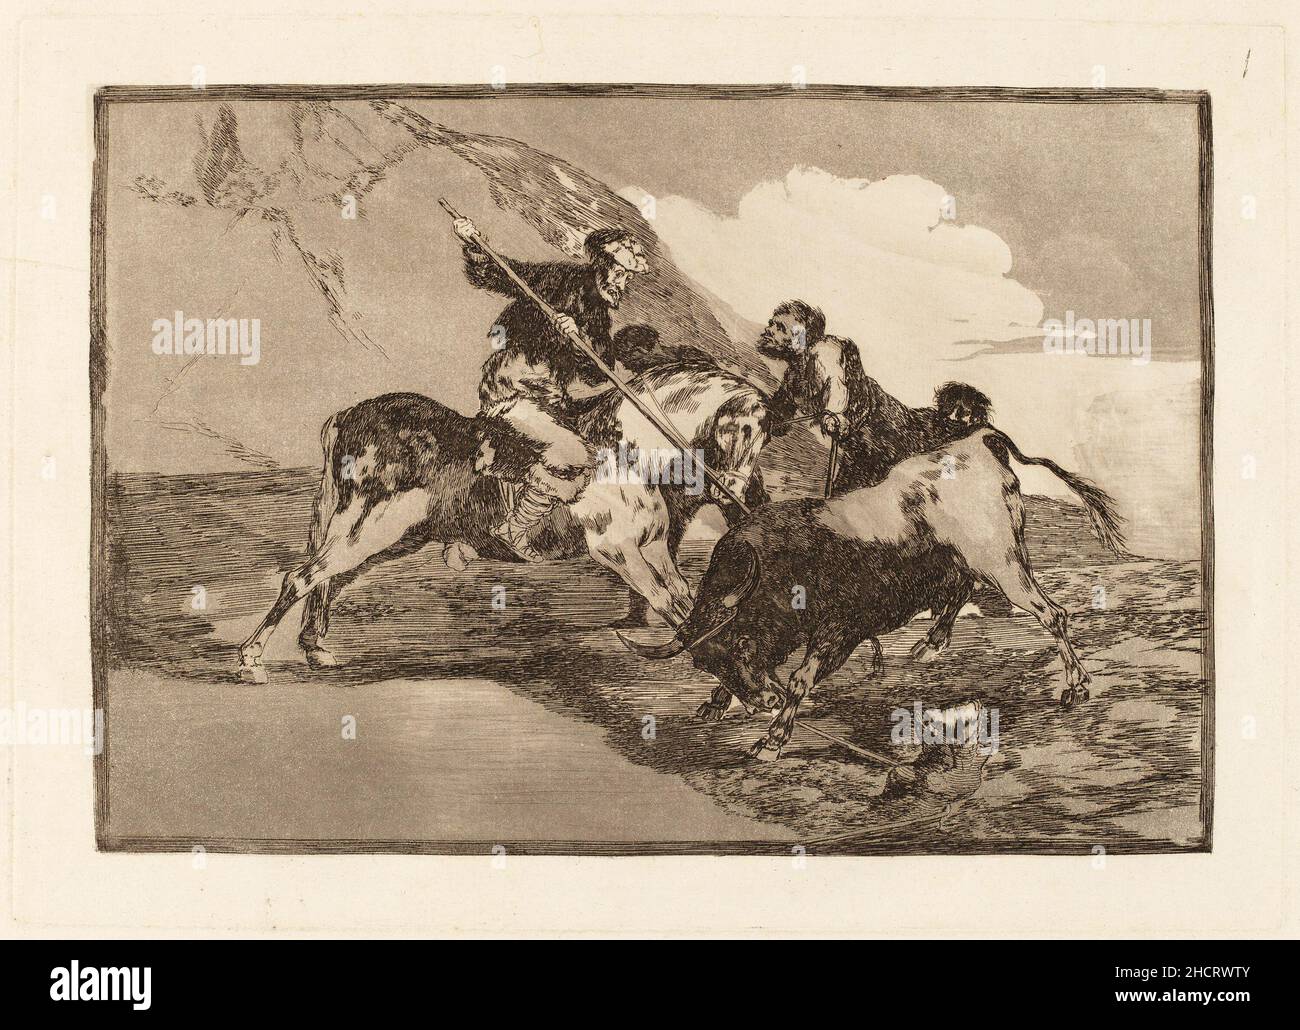 Francisco de Goya, Modo con que los antiguos Espanoles cazaban los toros a caballo en el campo (The Way  in which the Ancient Spaniards Hunted Bulls on Horseback in the Open Country). This is print number  1in a 33 print series on bullfighting. Stock Photo